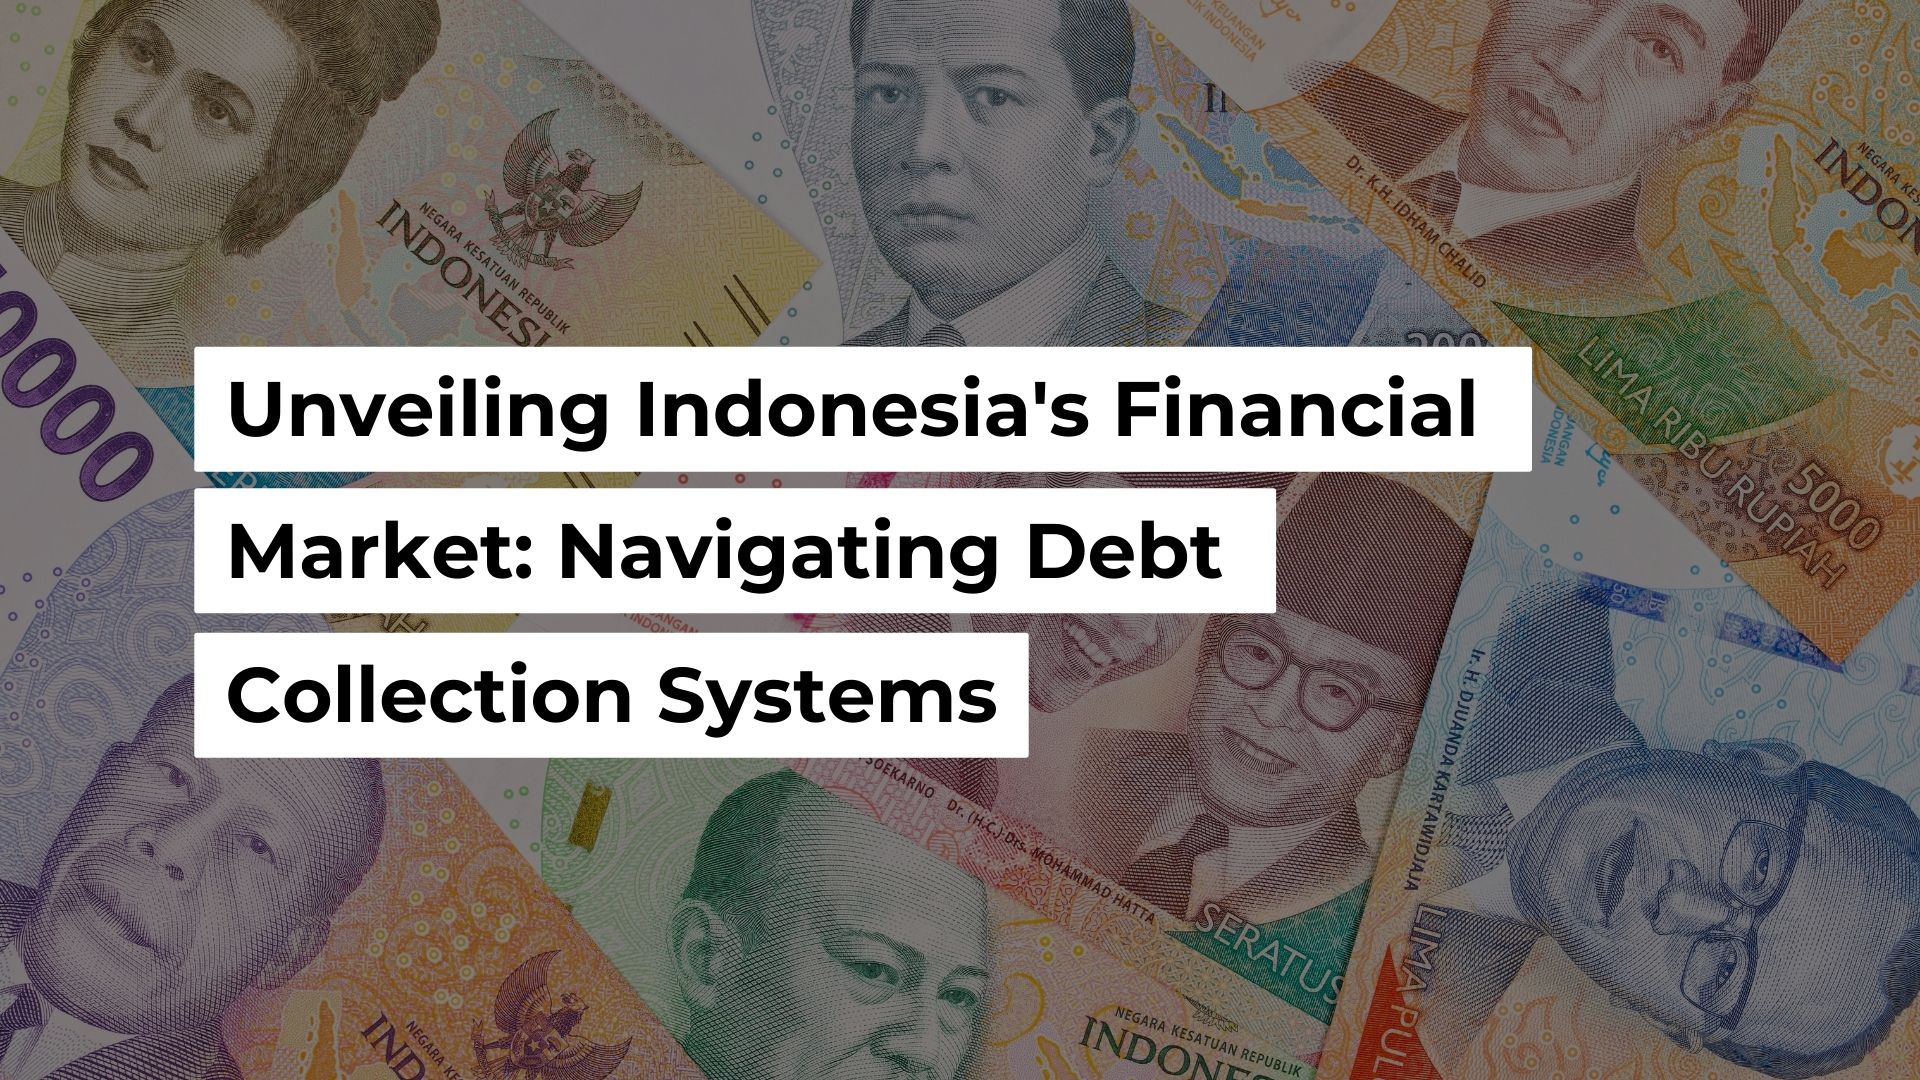 Indonesia's financial market